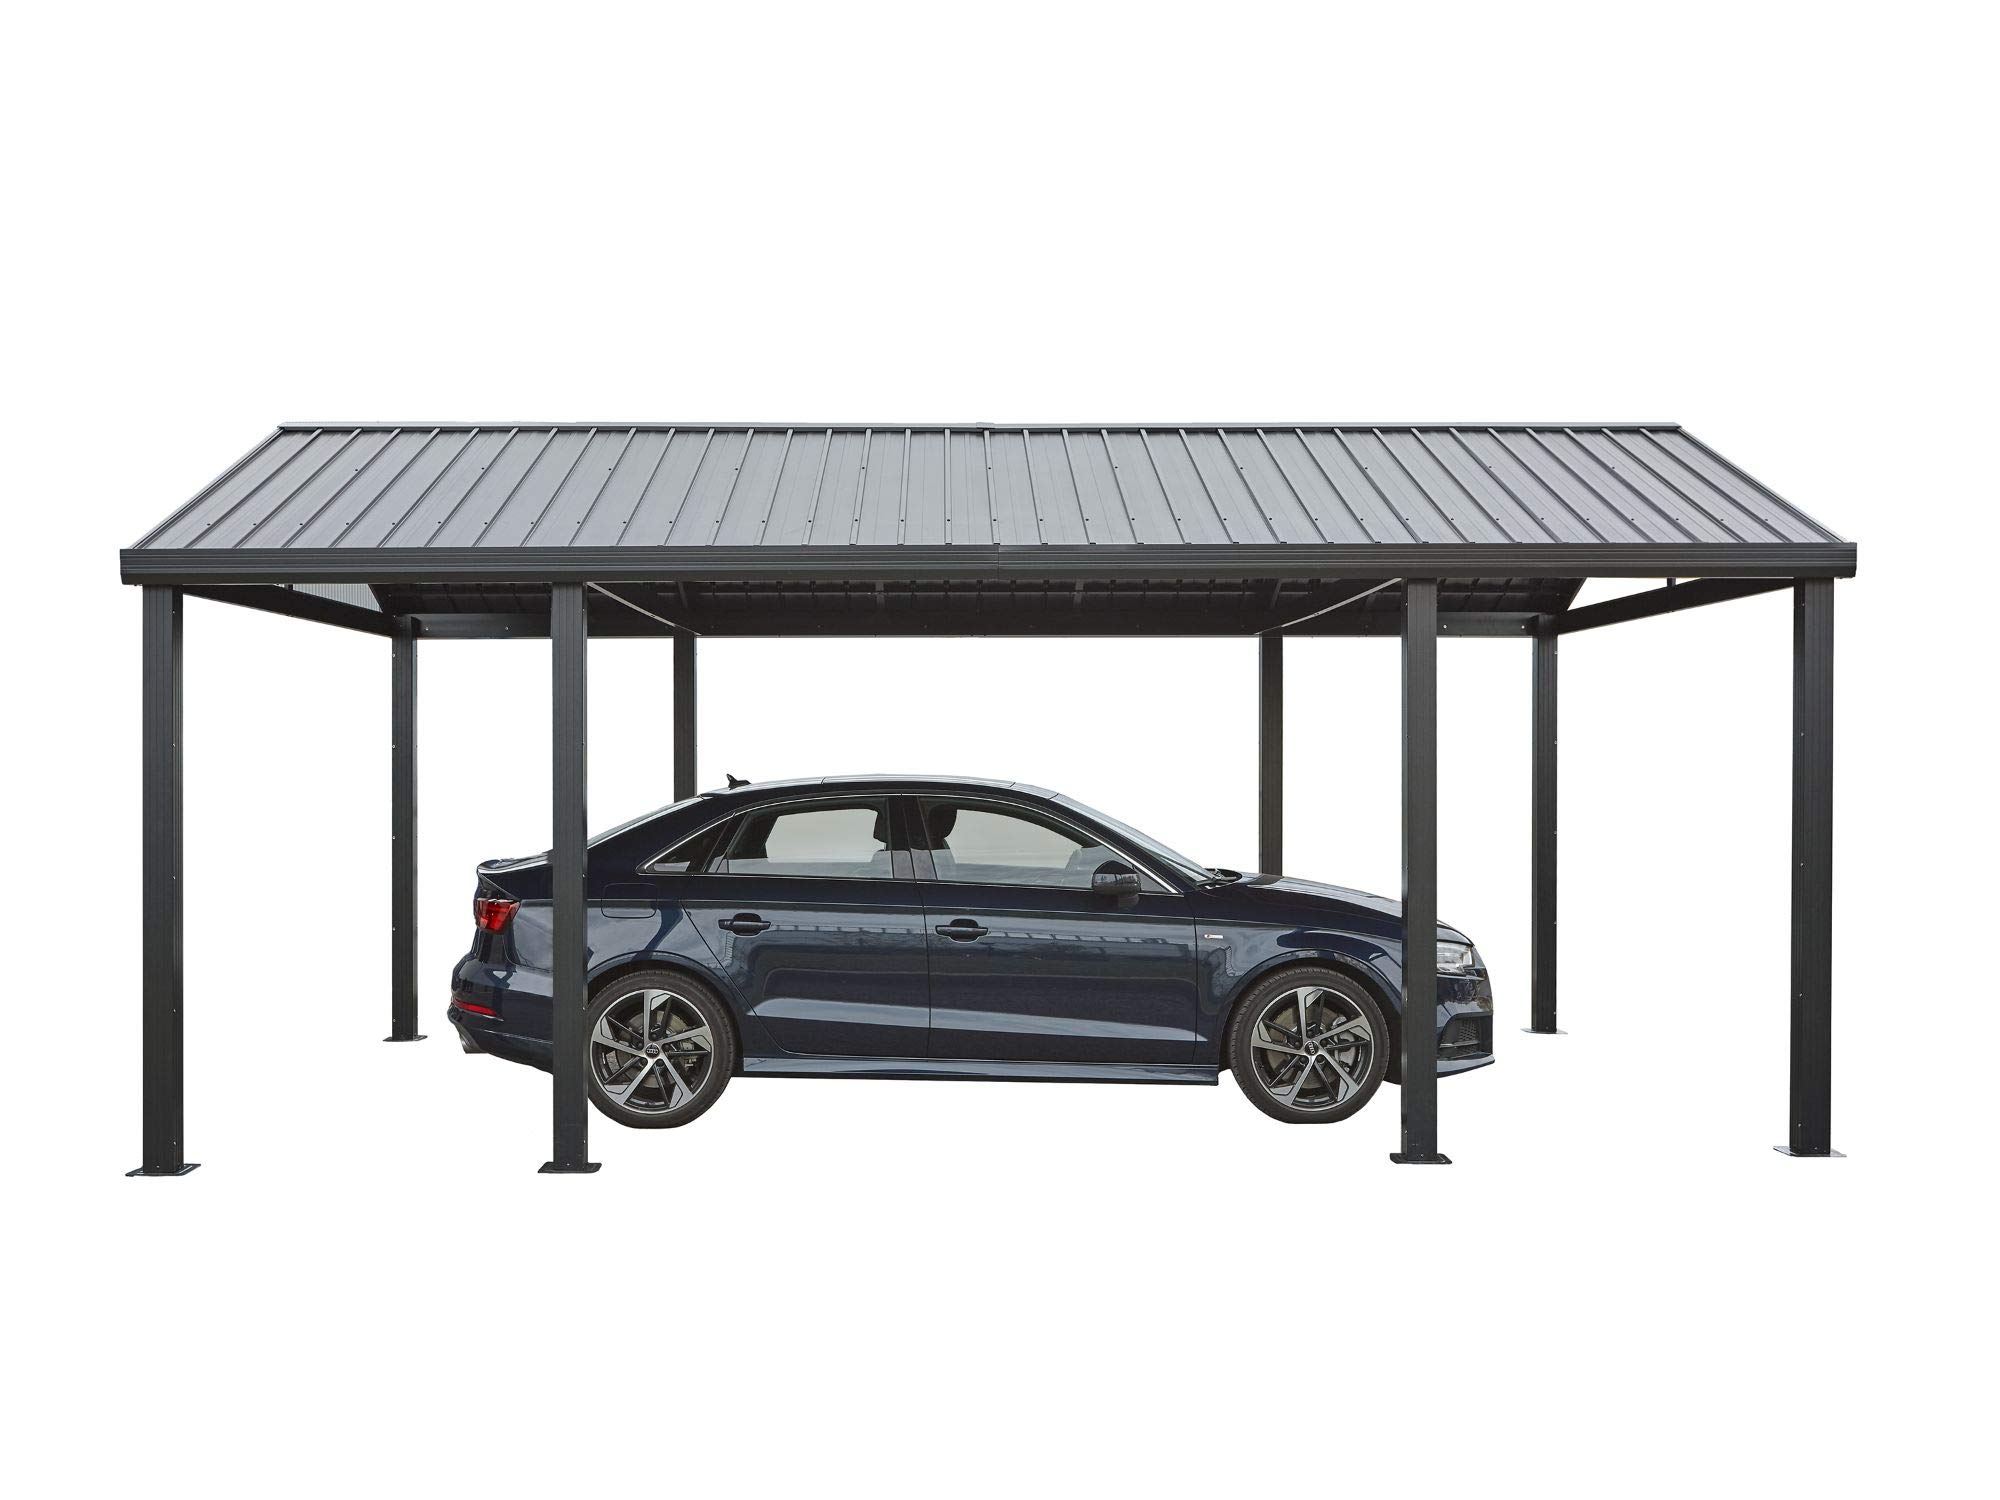 Sojag 20' x 12' Samara Carport with Aluminum Frame and 10' High Galvanized Steel Roof for Easy Drive Through Access